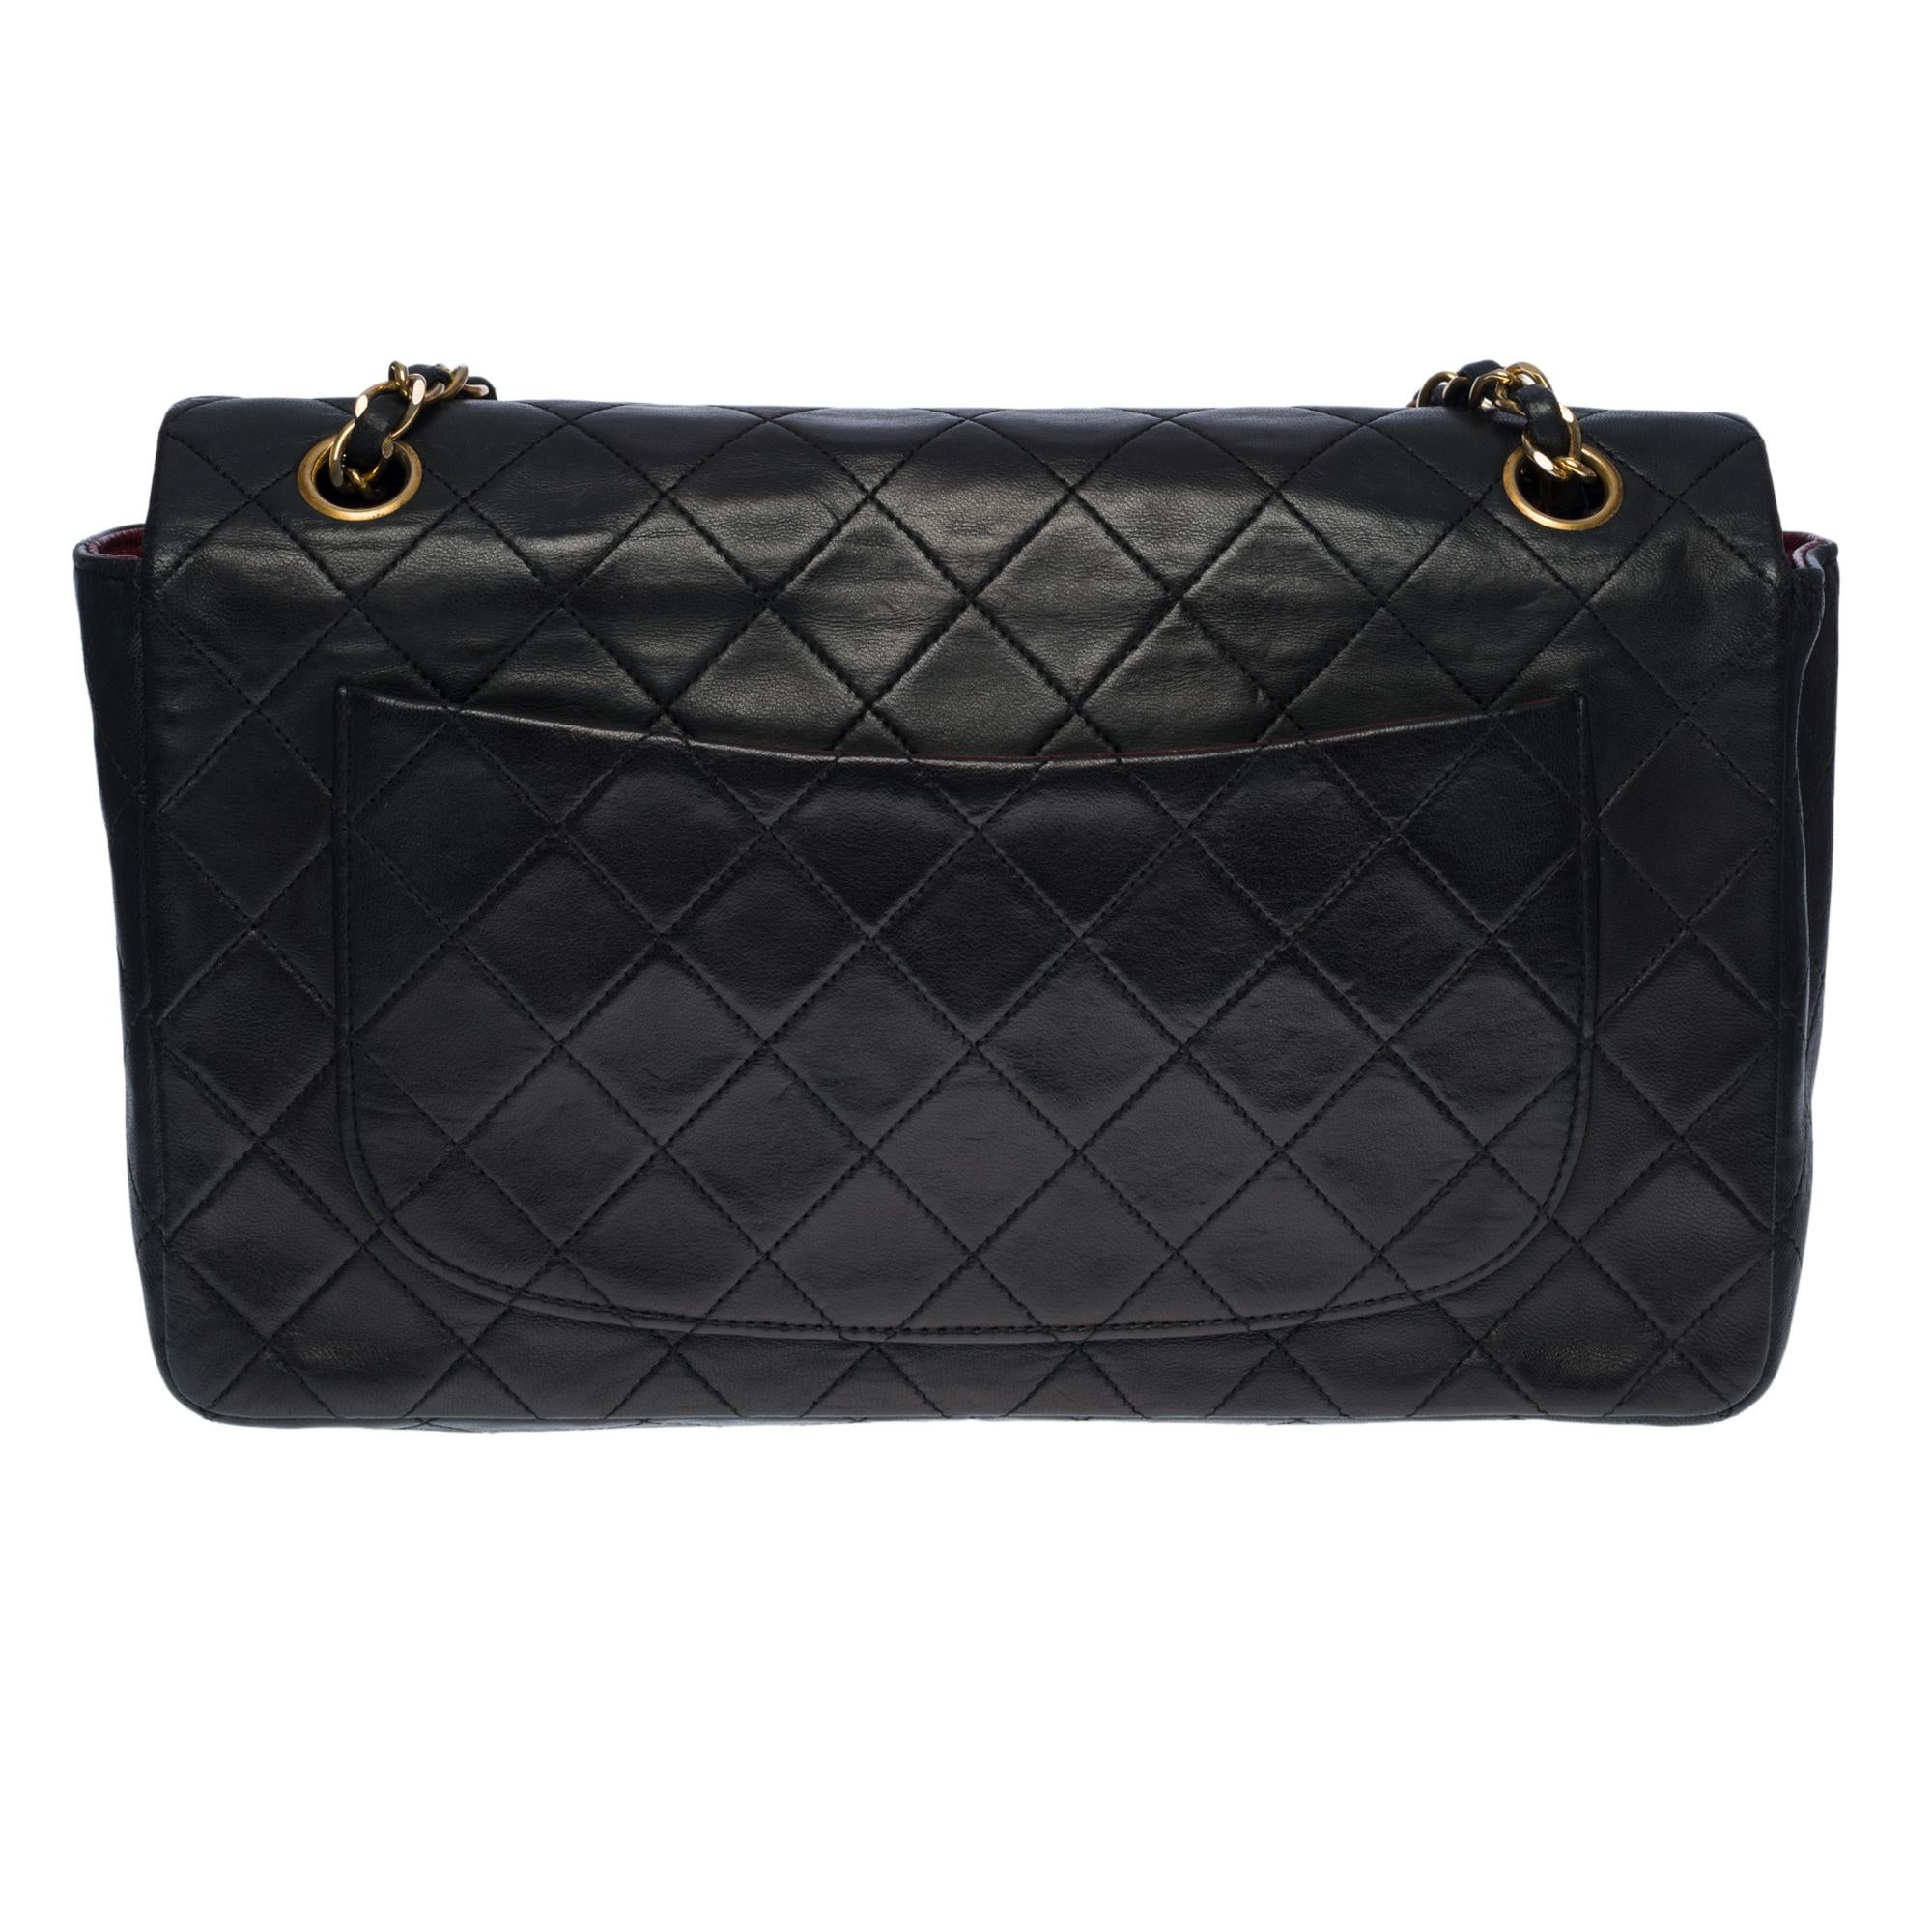 The amazing Chanel Timeless/Classic 27cm Flap shoulder bag in black quilted leather, gold-tone metal hardware, gold-tone metal chain interlaced with black leather for a shoulder and shoulder strap 
 
Backpack pocket 
Flap closure, gold-tone CC clasp